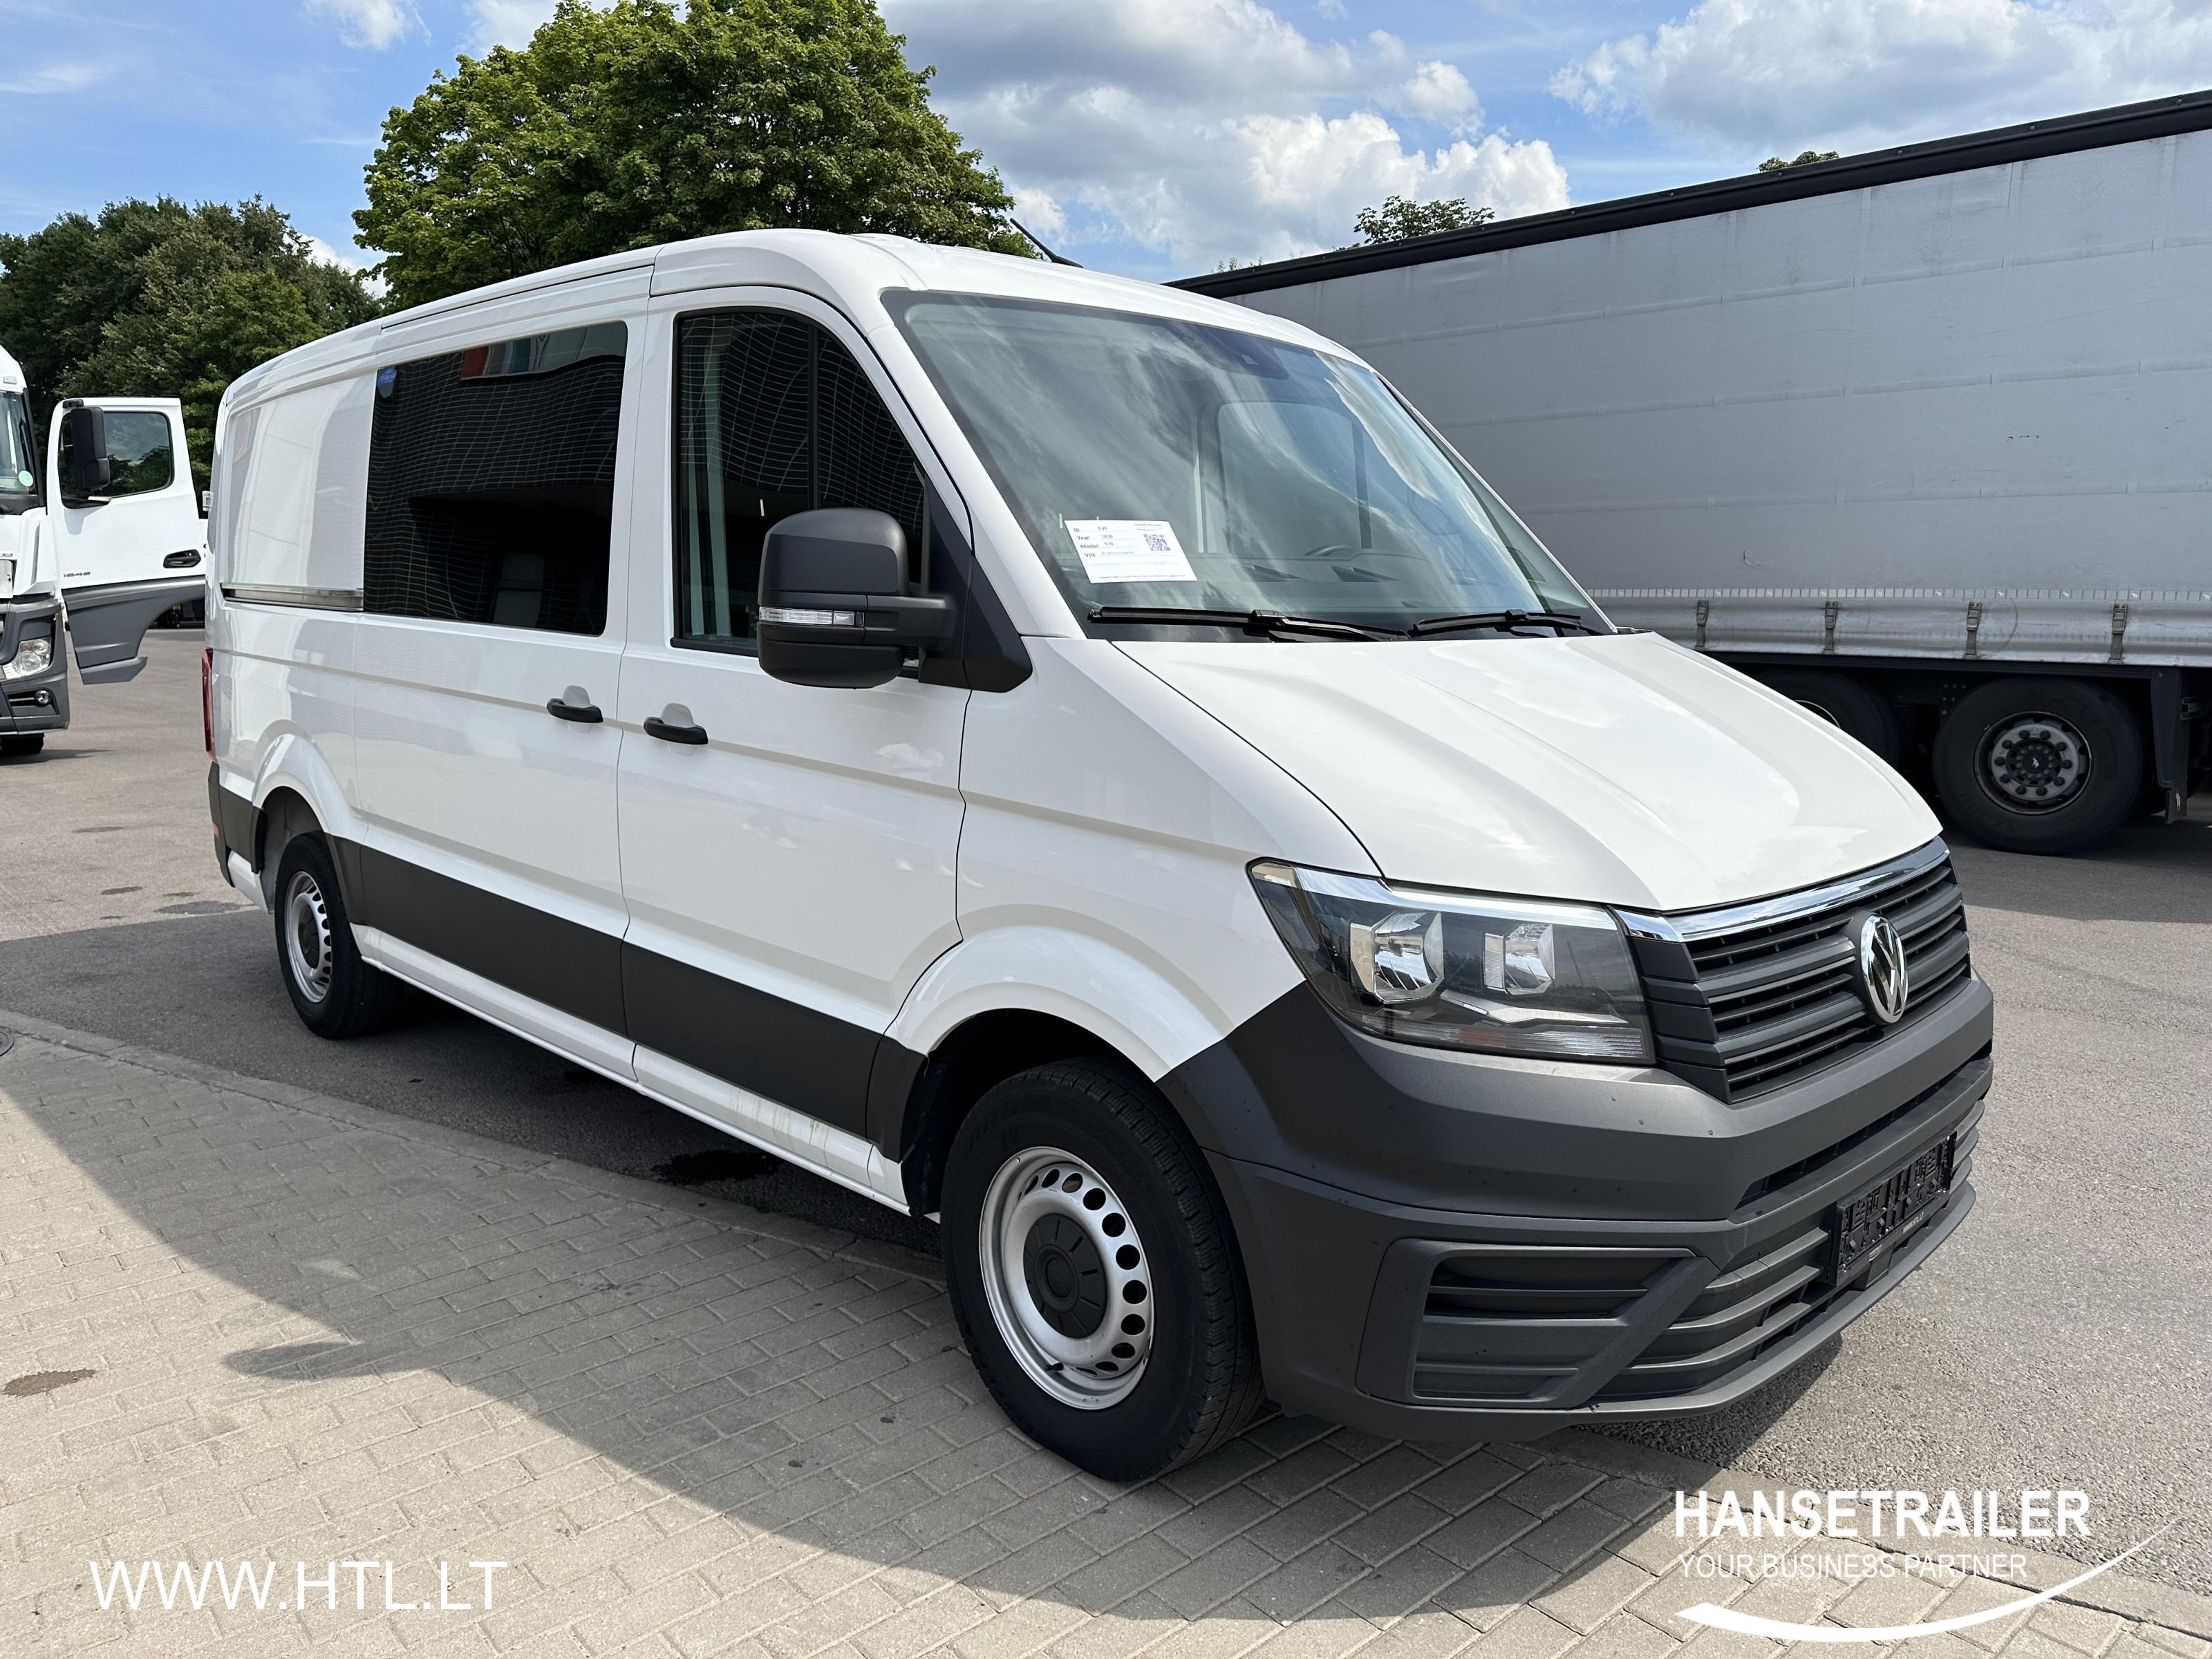 VW Crafter ❮ Passenger up to 3.5 t ❮ Wagon @ Hanse Trailer